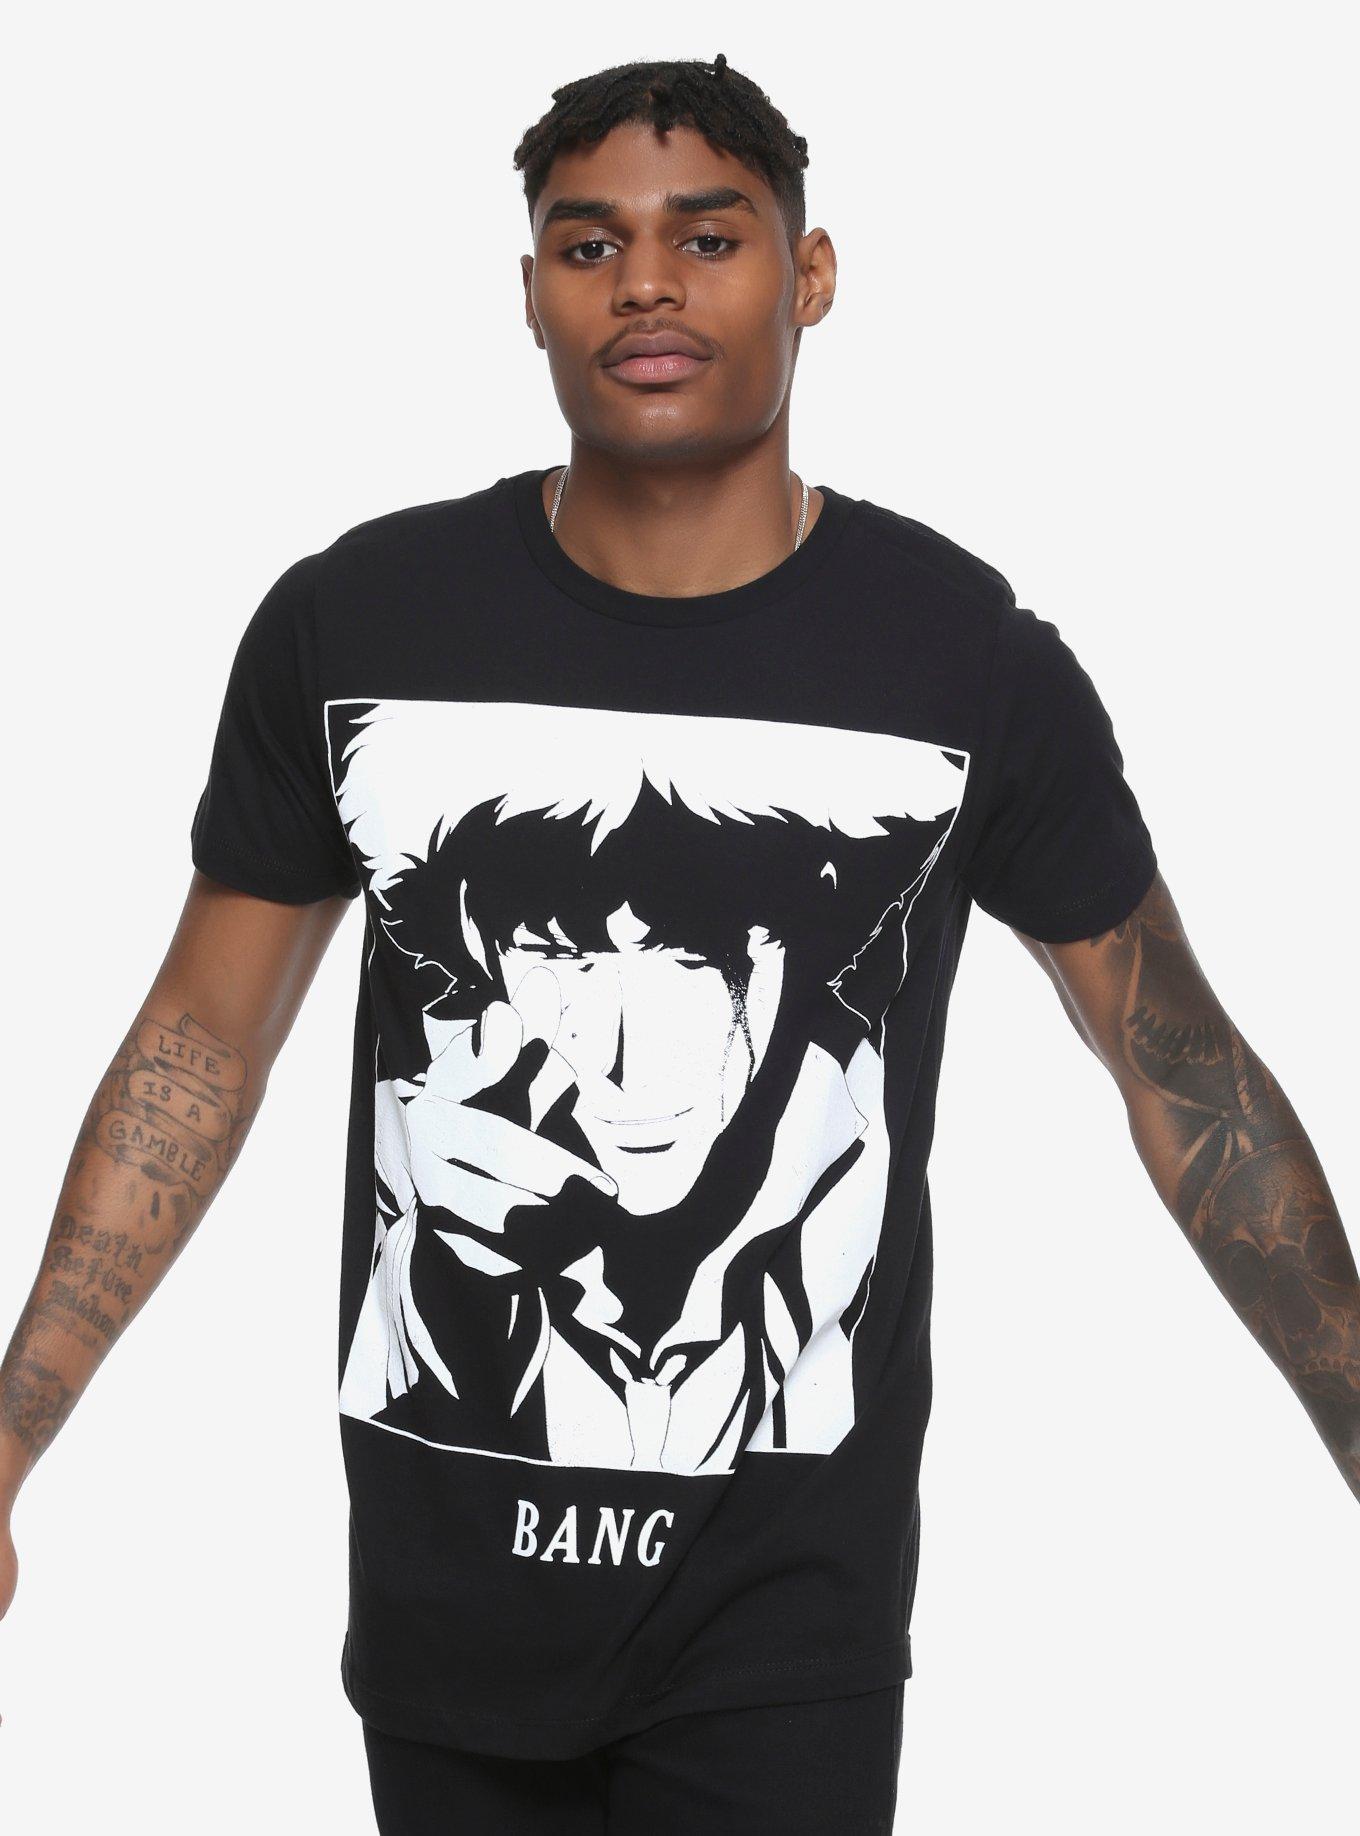 Cowboy Bebop See You T-Shirt Hot Topic Exclusive, , alternate